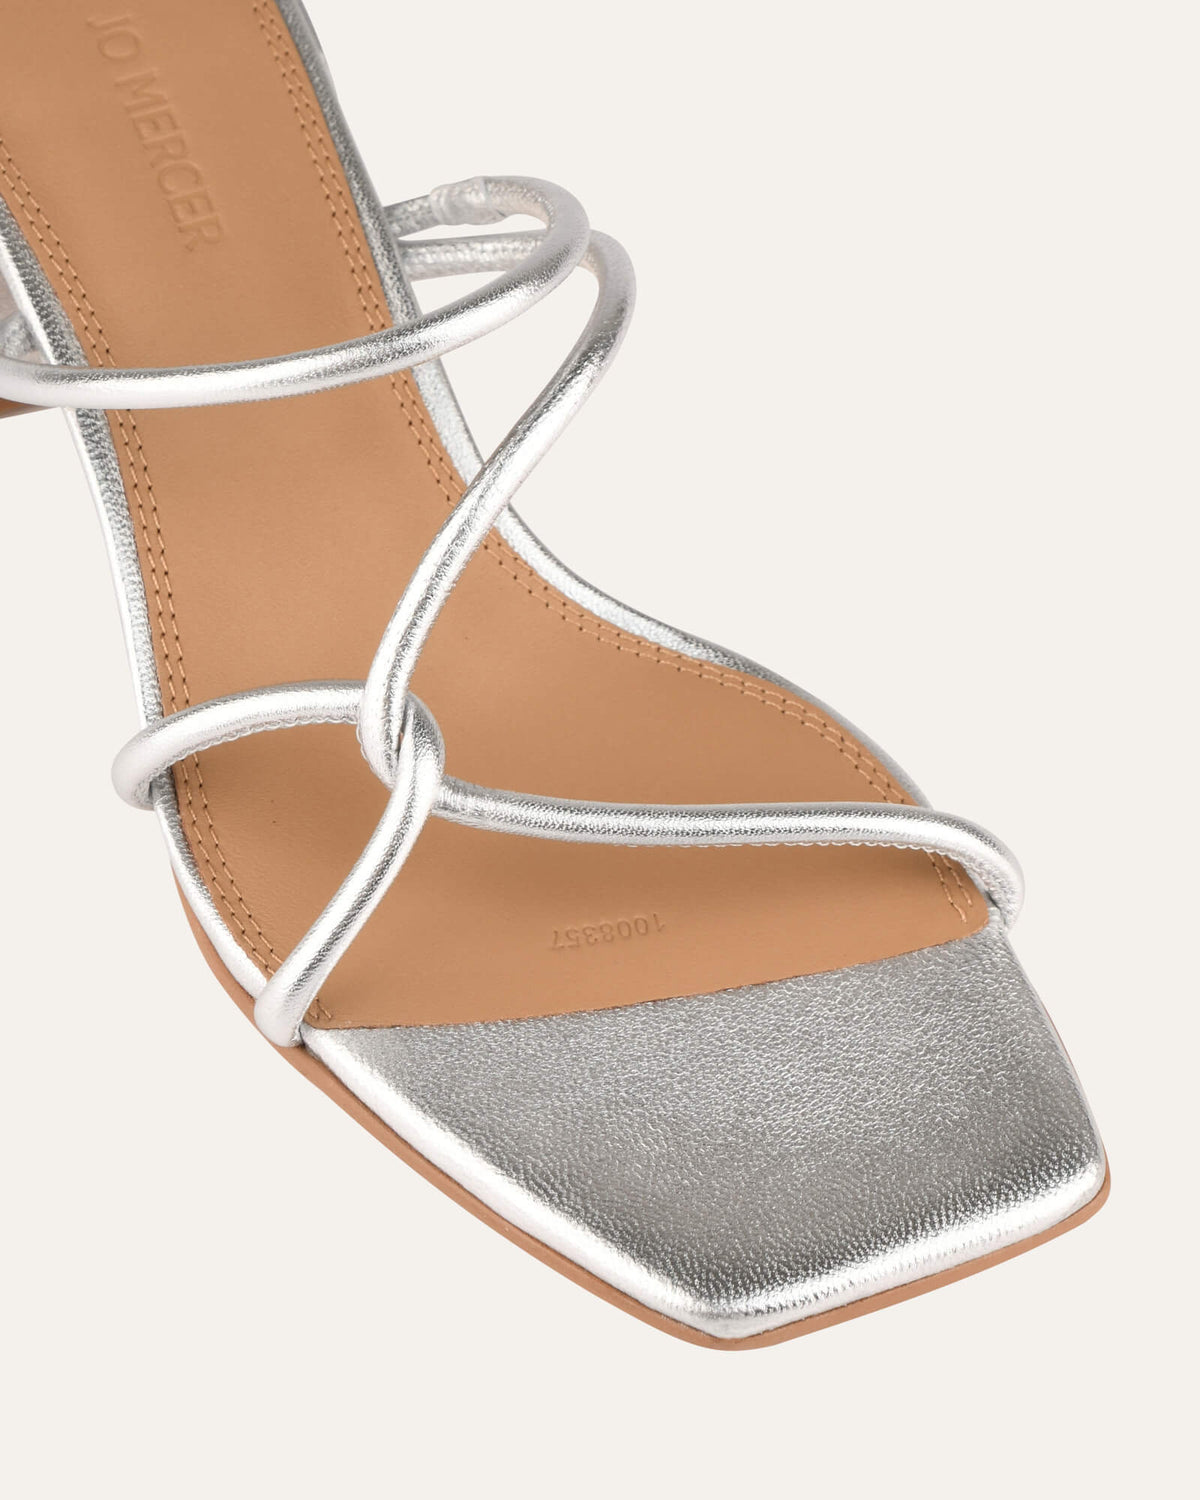 ORA MID HEEL SANDALS SILVER LEATHER